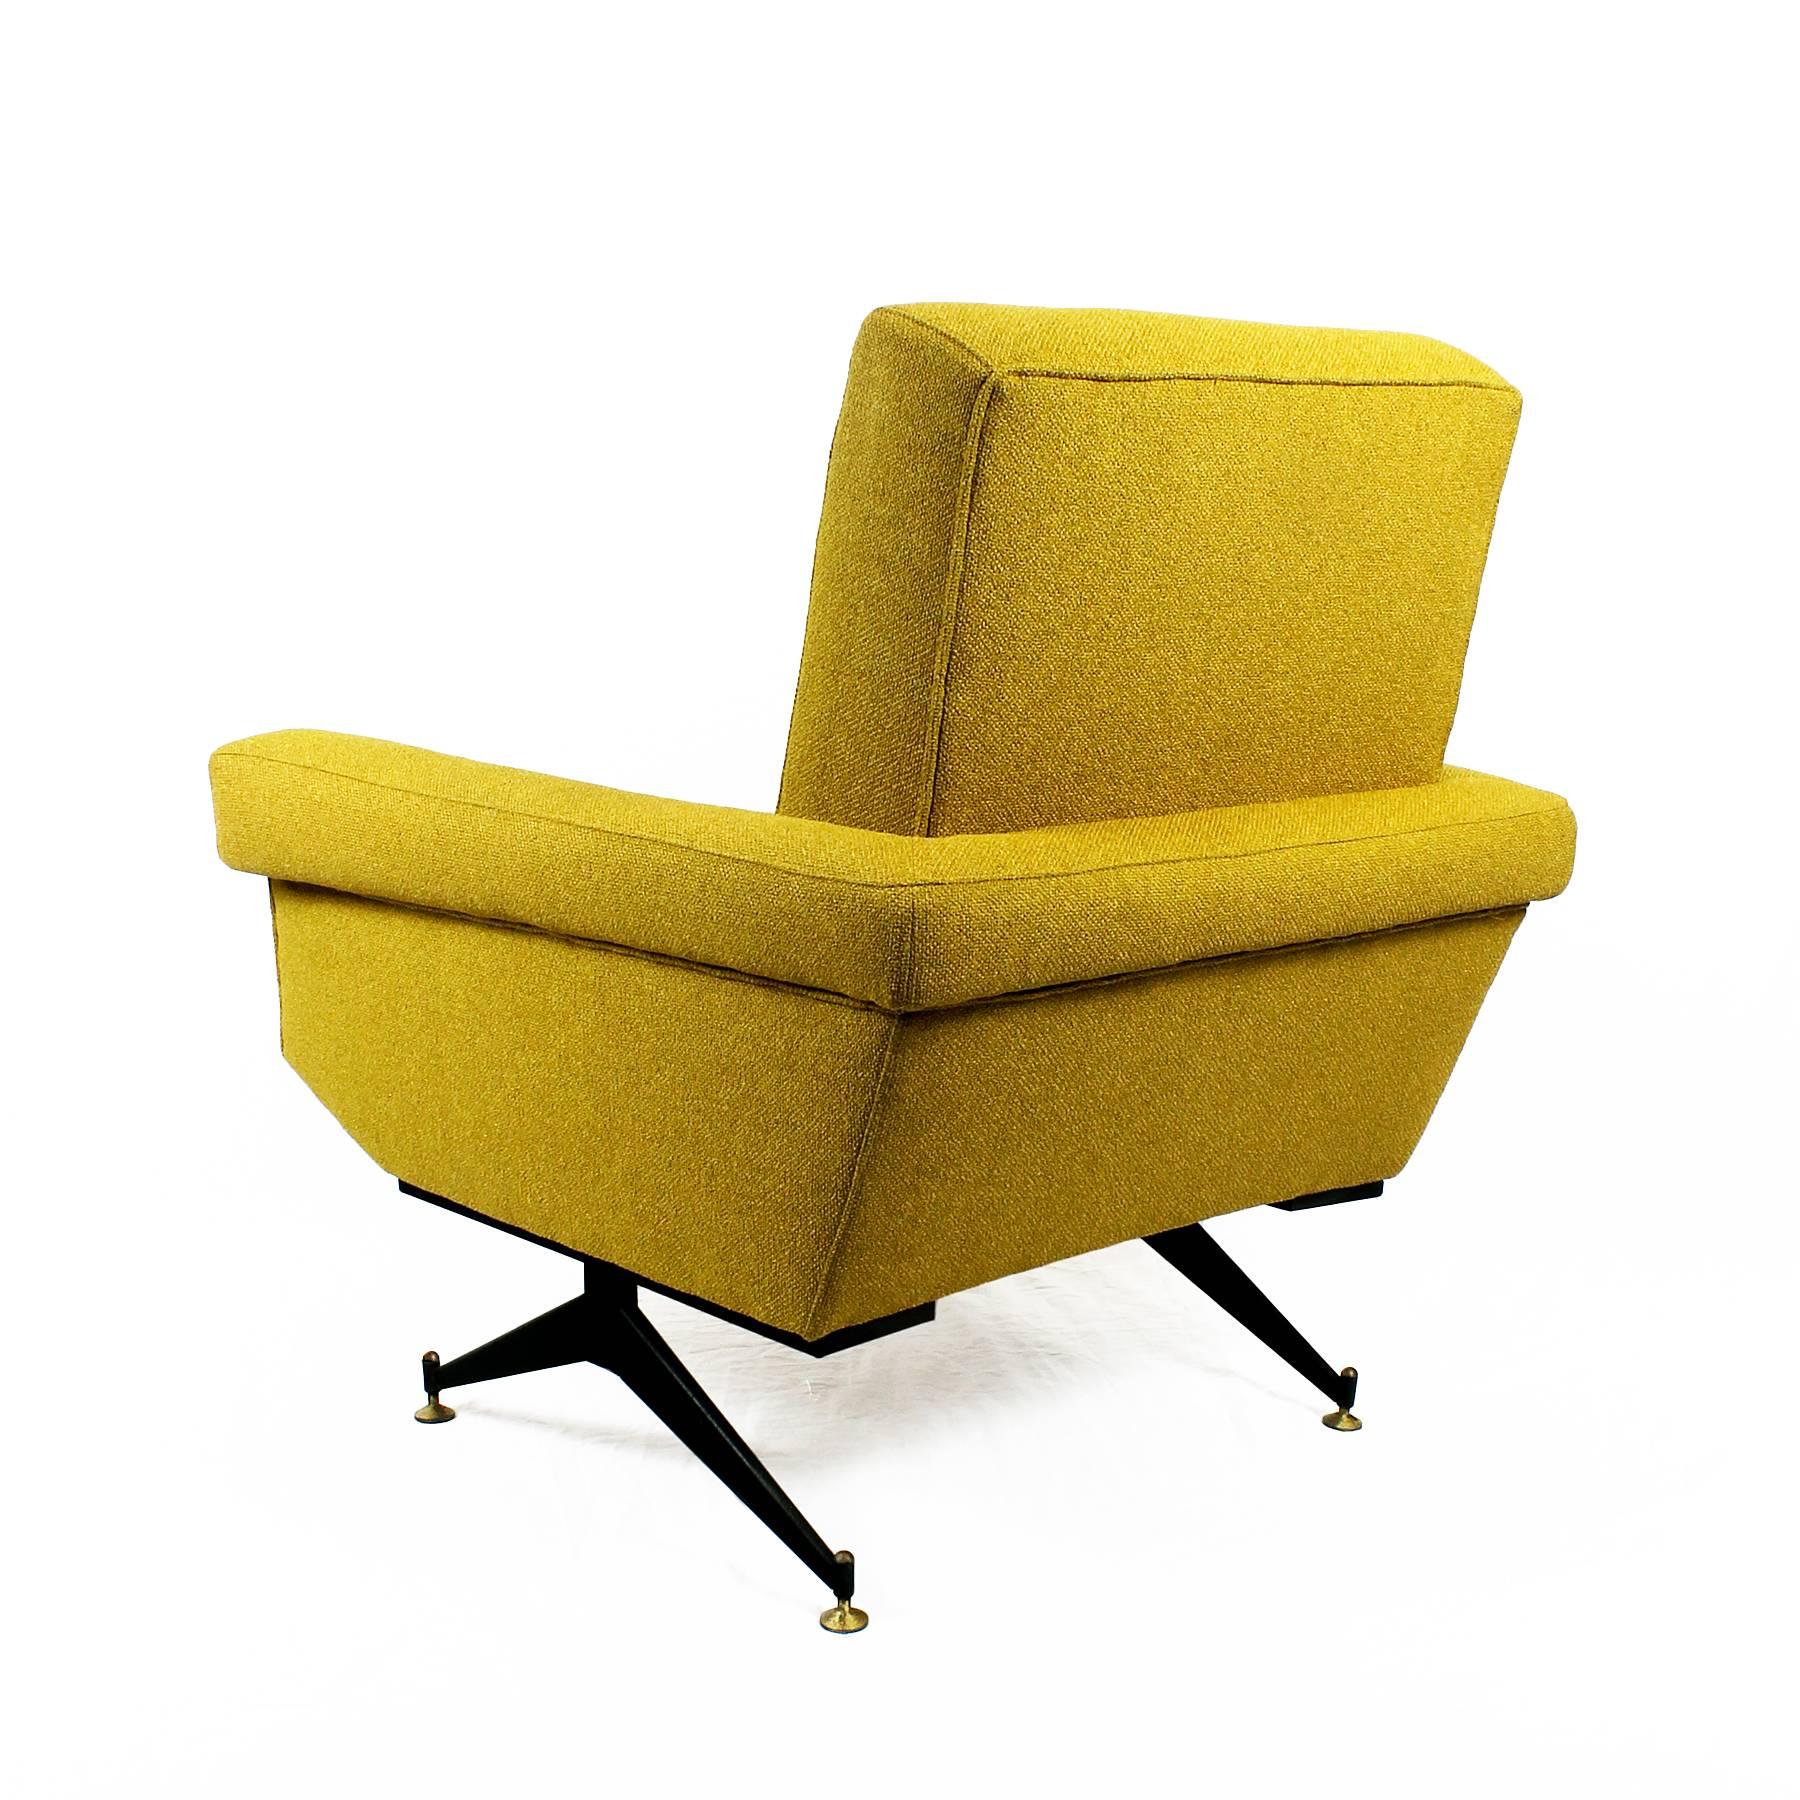 Mid-20th Century Pair of Mid-Century Modern Padded Armchairs With Yellow-Mustard Fabric - Italy For Sale